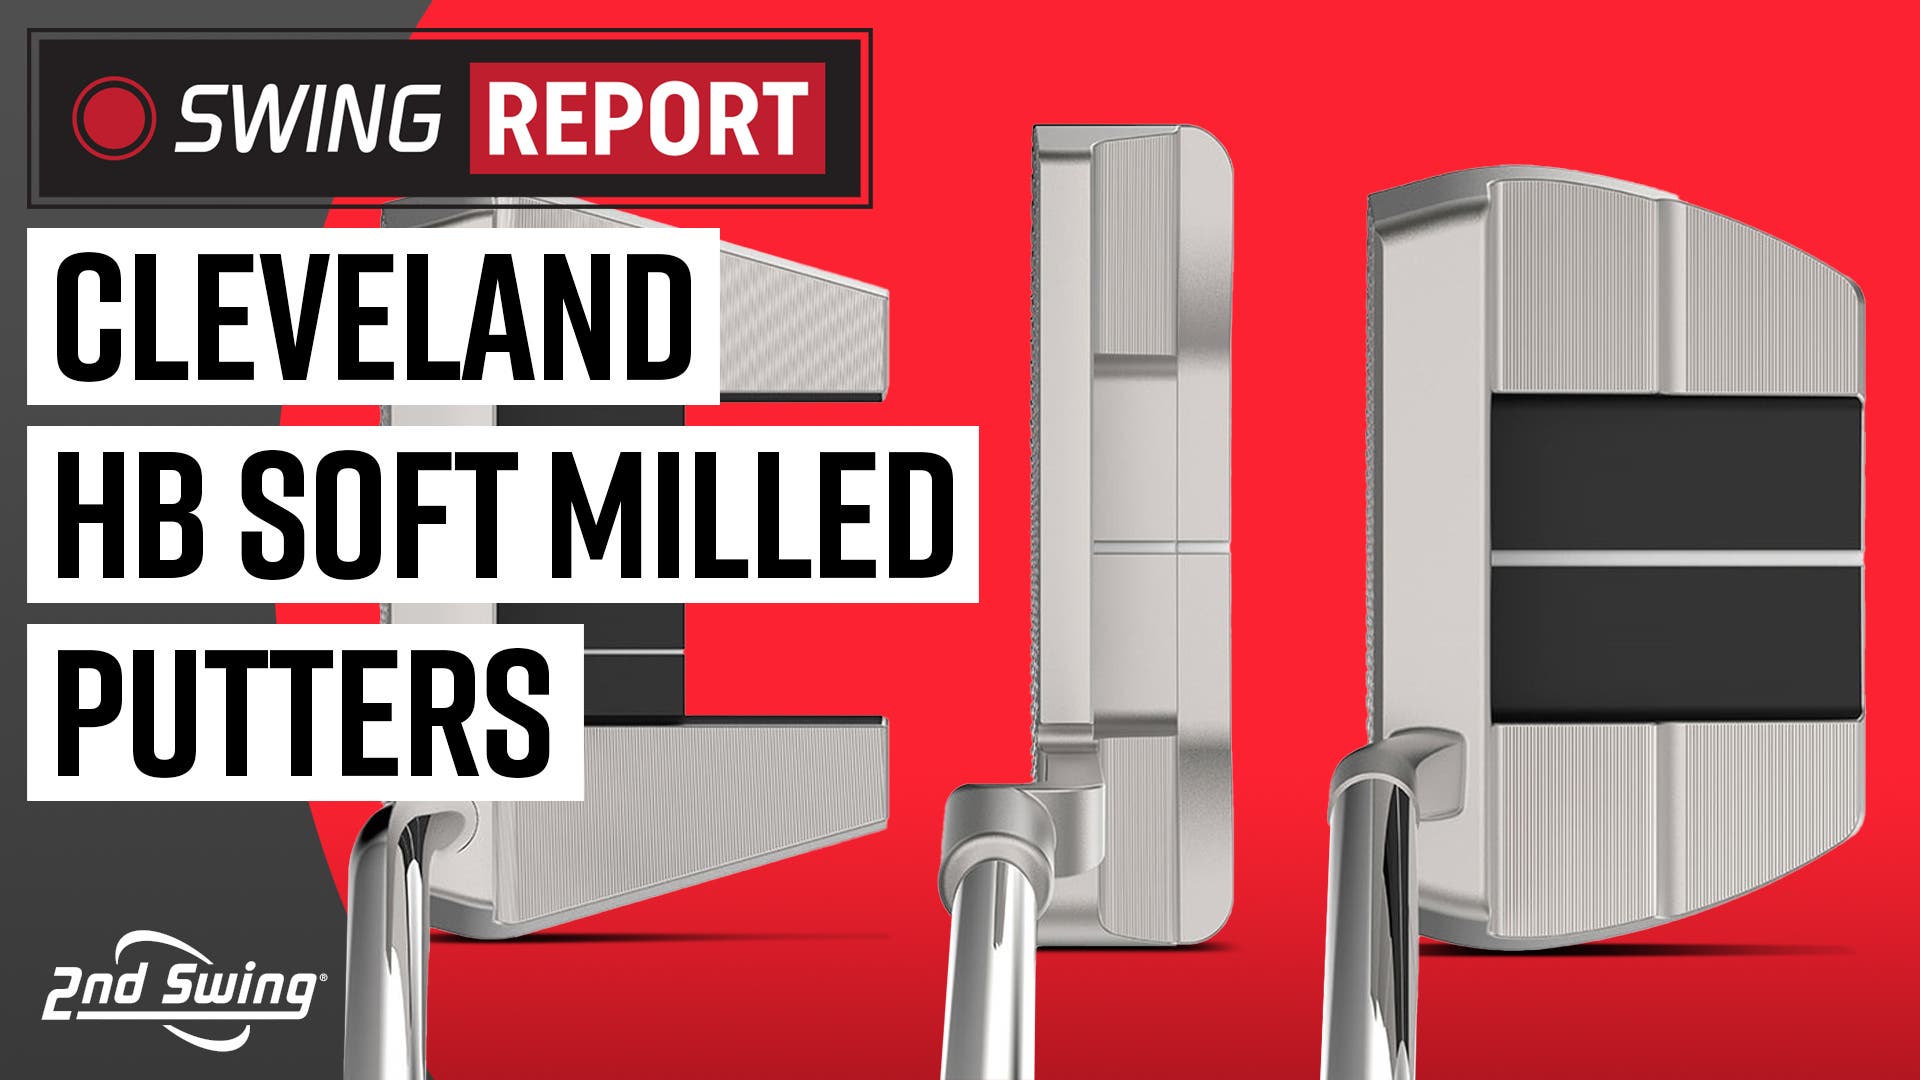 Precision Milling, Consistent Feel: Cleveland's HB Soft Milled Putters